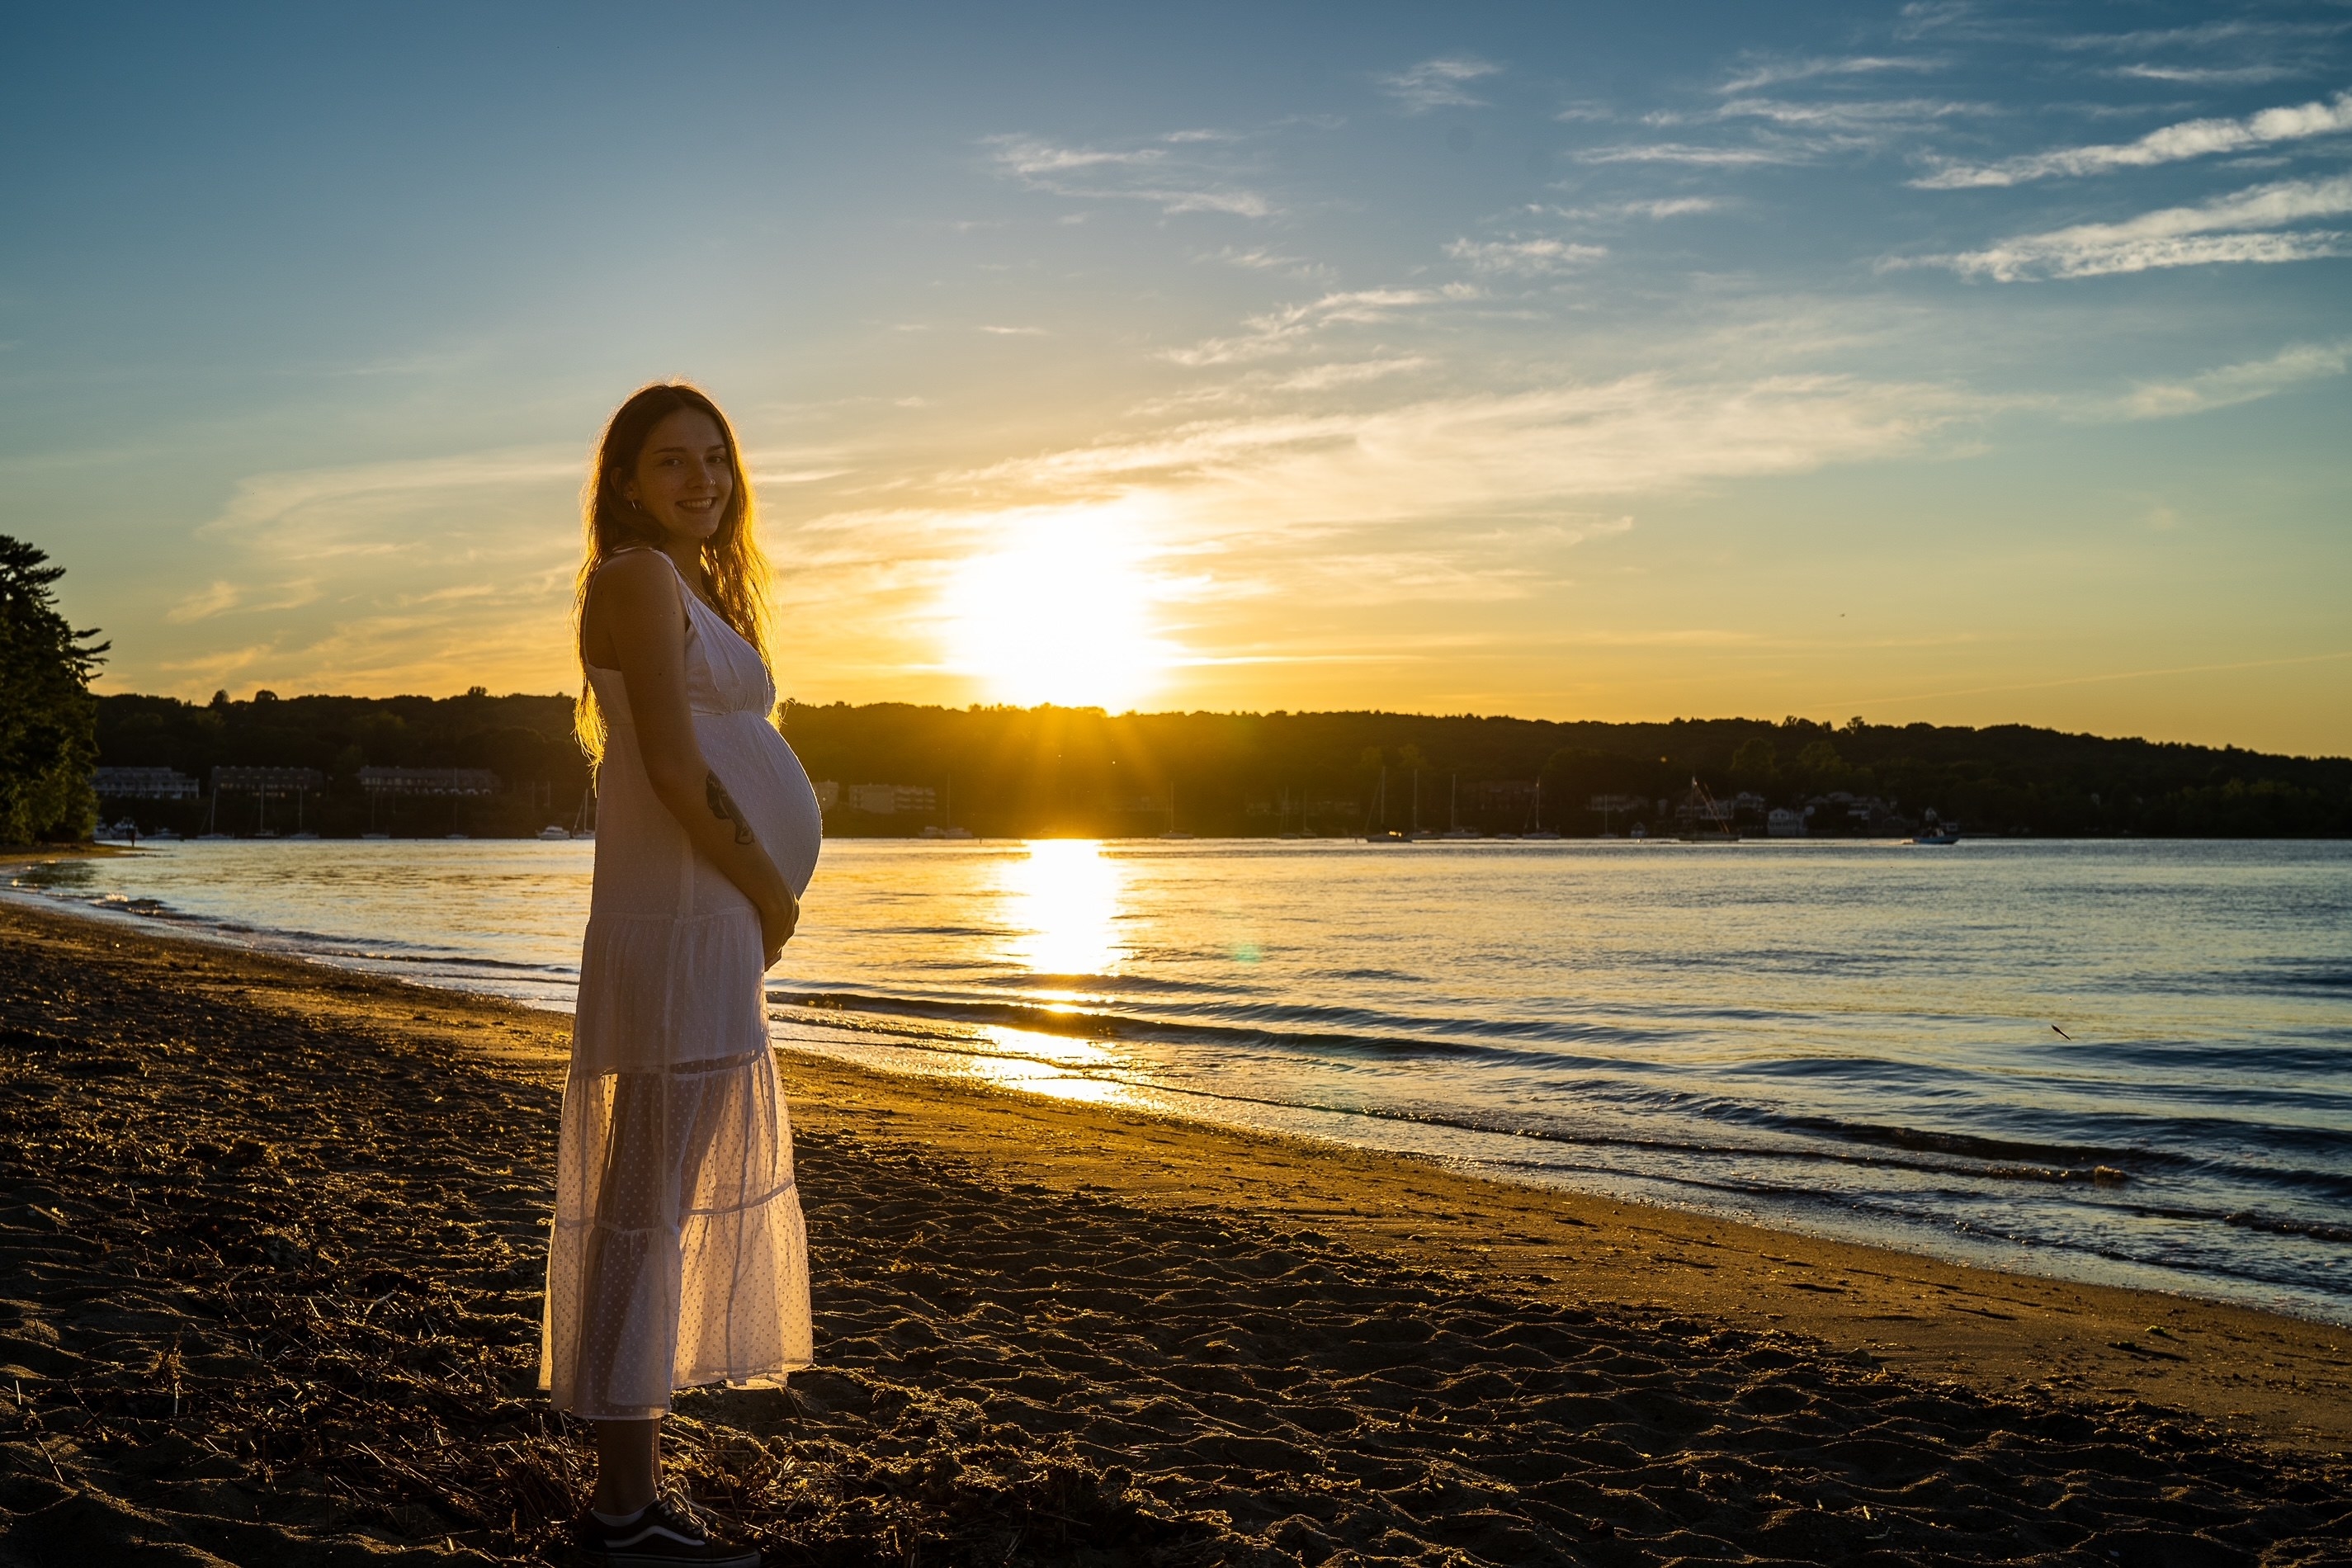 Marissa standing at the beach at sunset cradling her baby bump